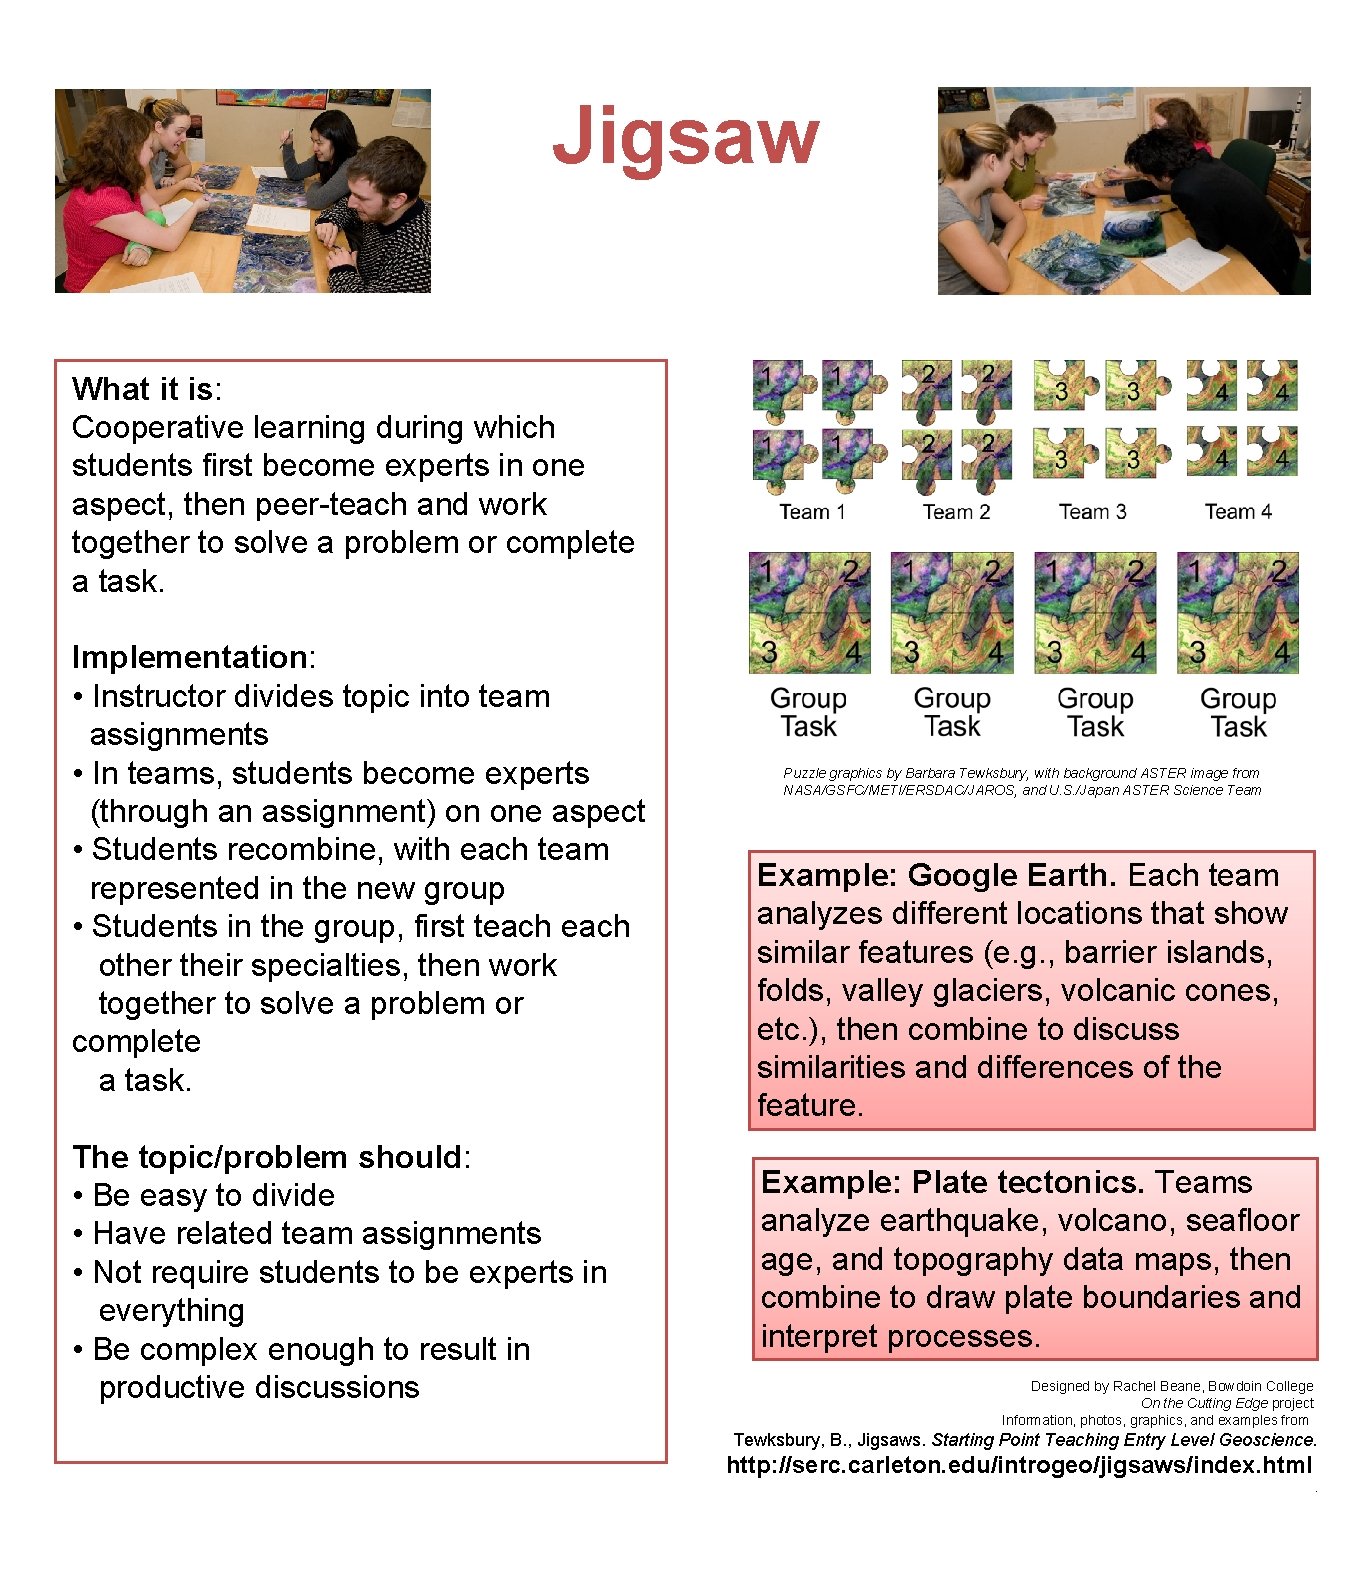 Jigsaw What it is: Cooperative learning during which students first become experts in one